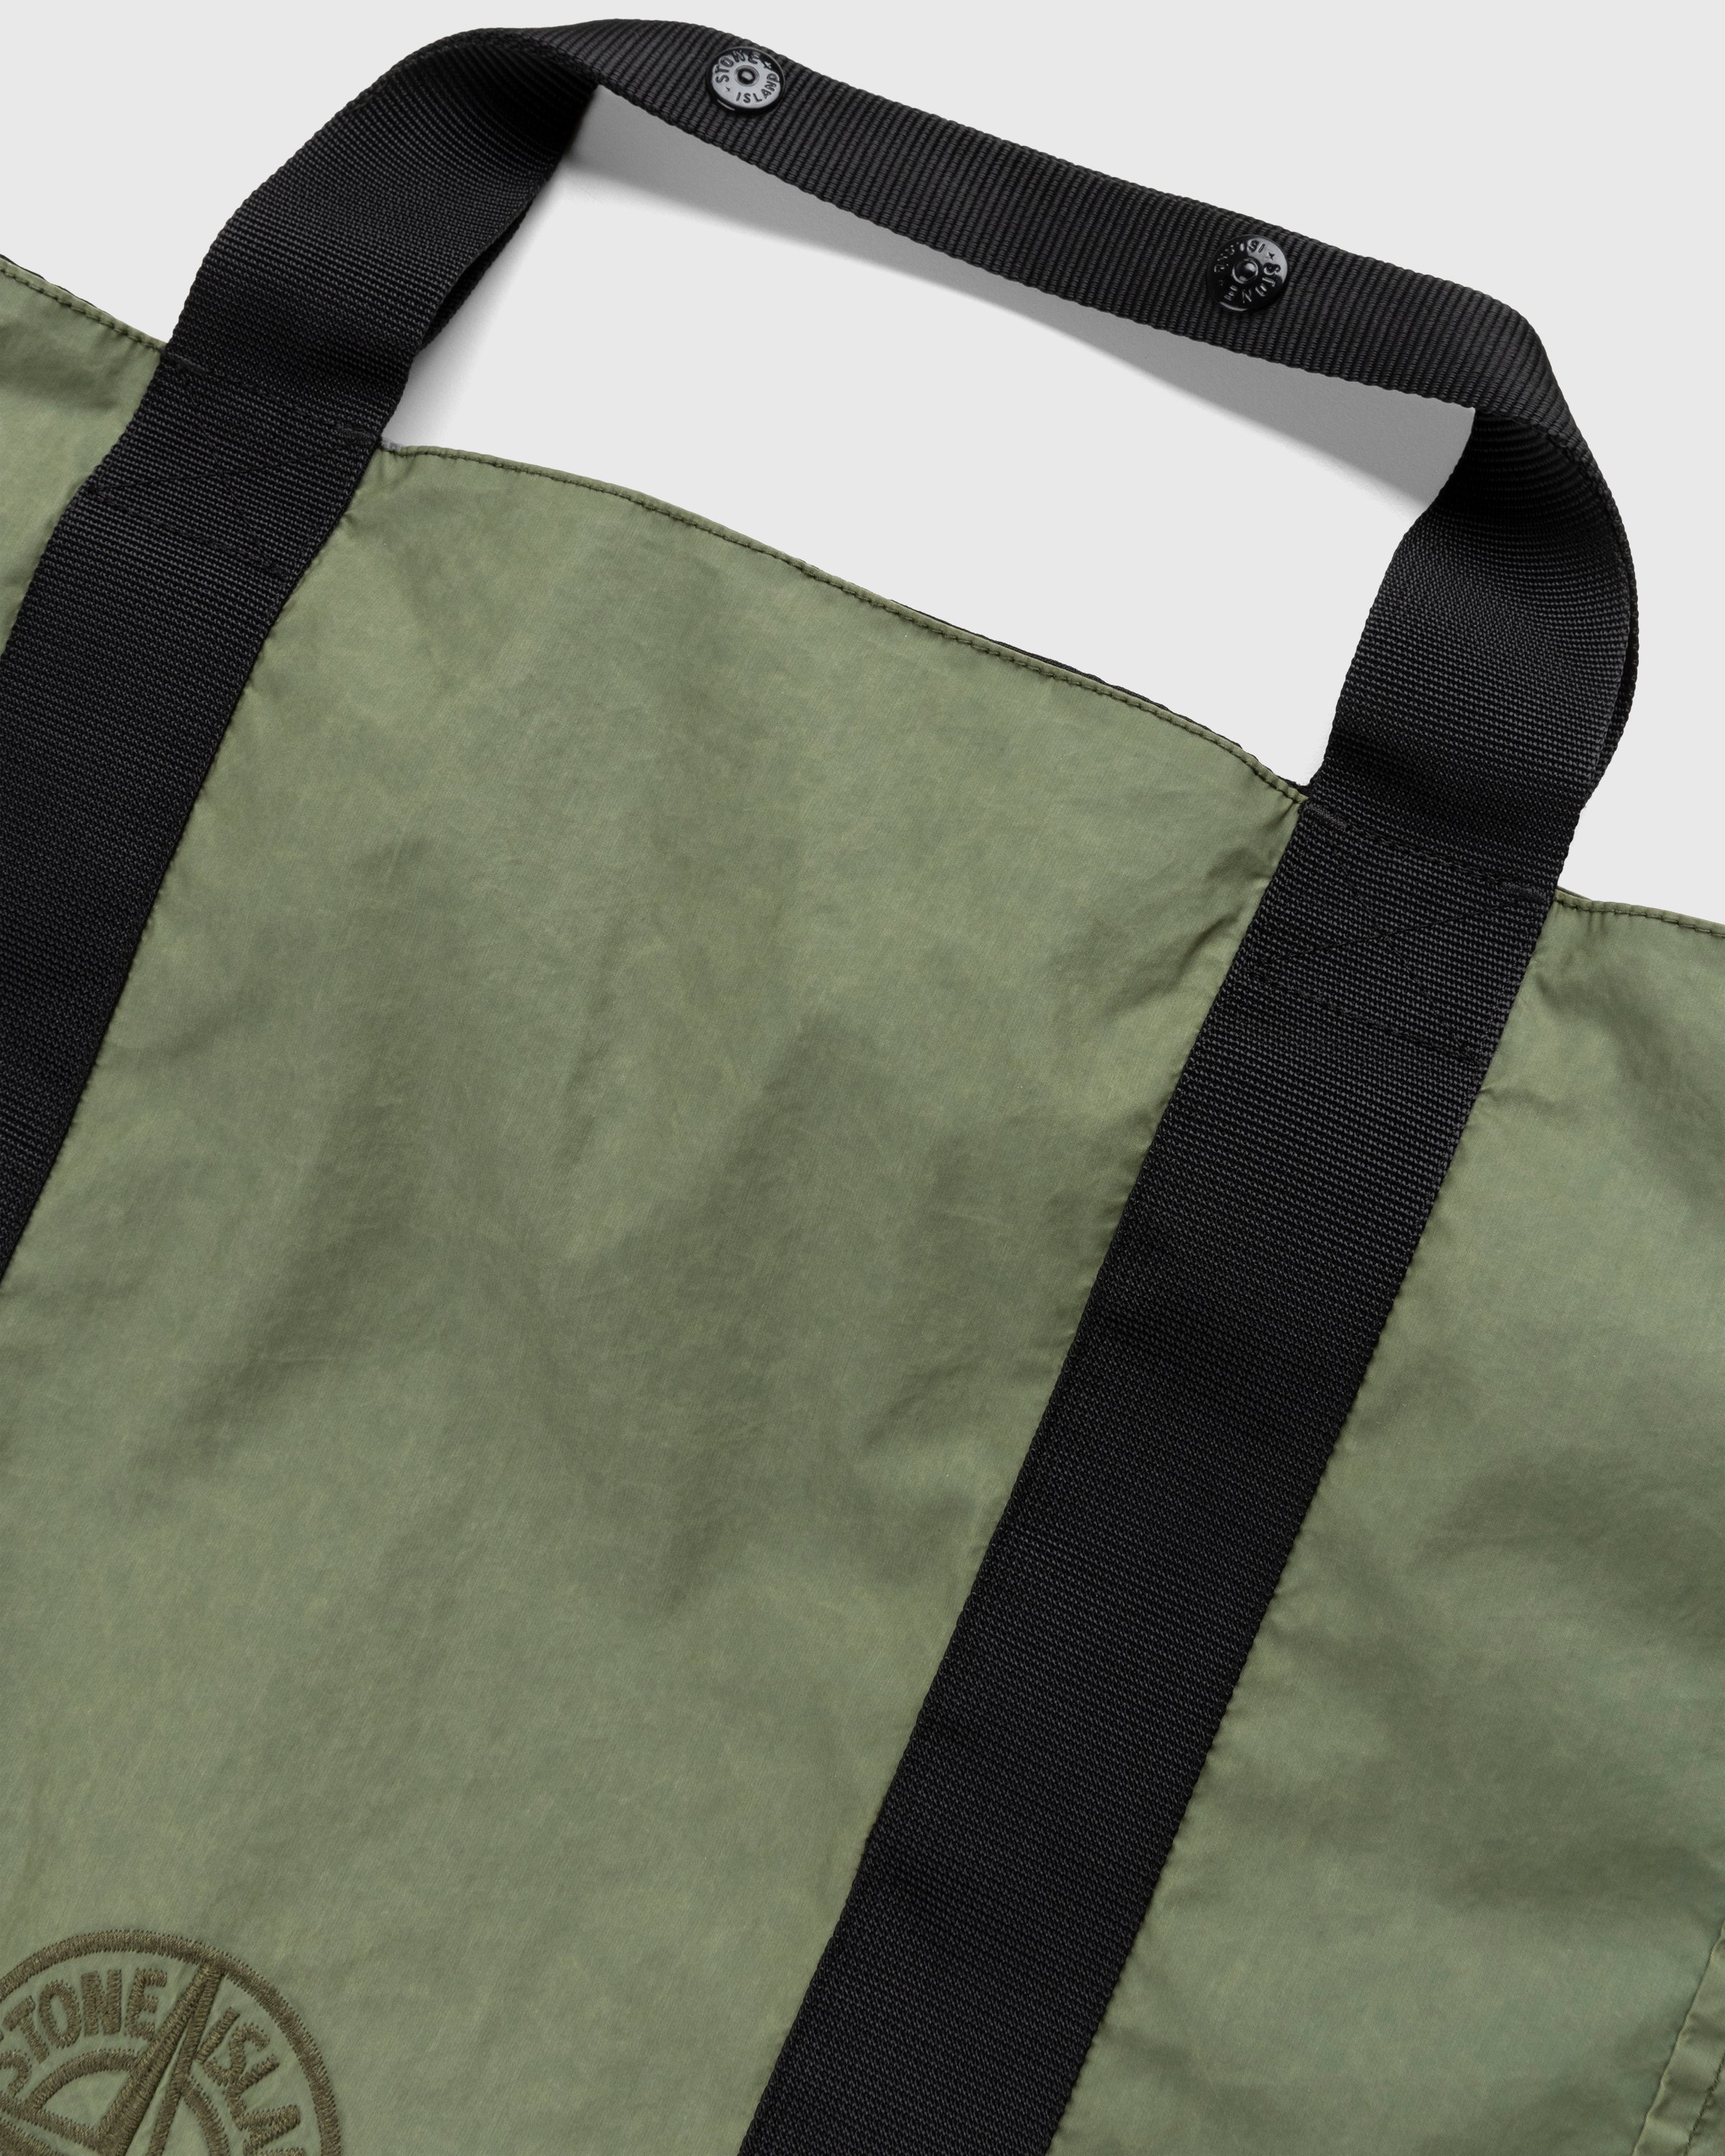 Stone Island - 91475 Garment-Dyed Tote Bag Olive - Accessories - Green - Image 4